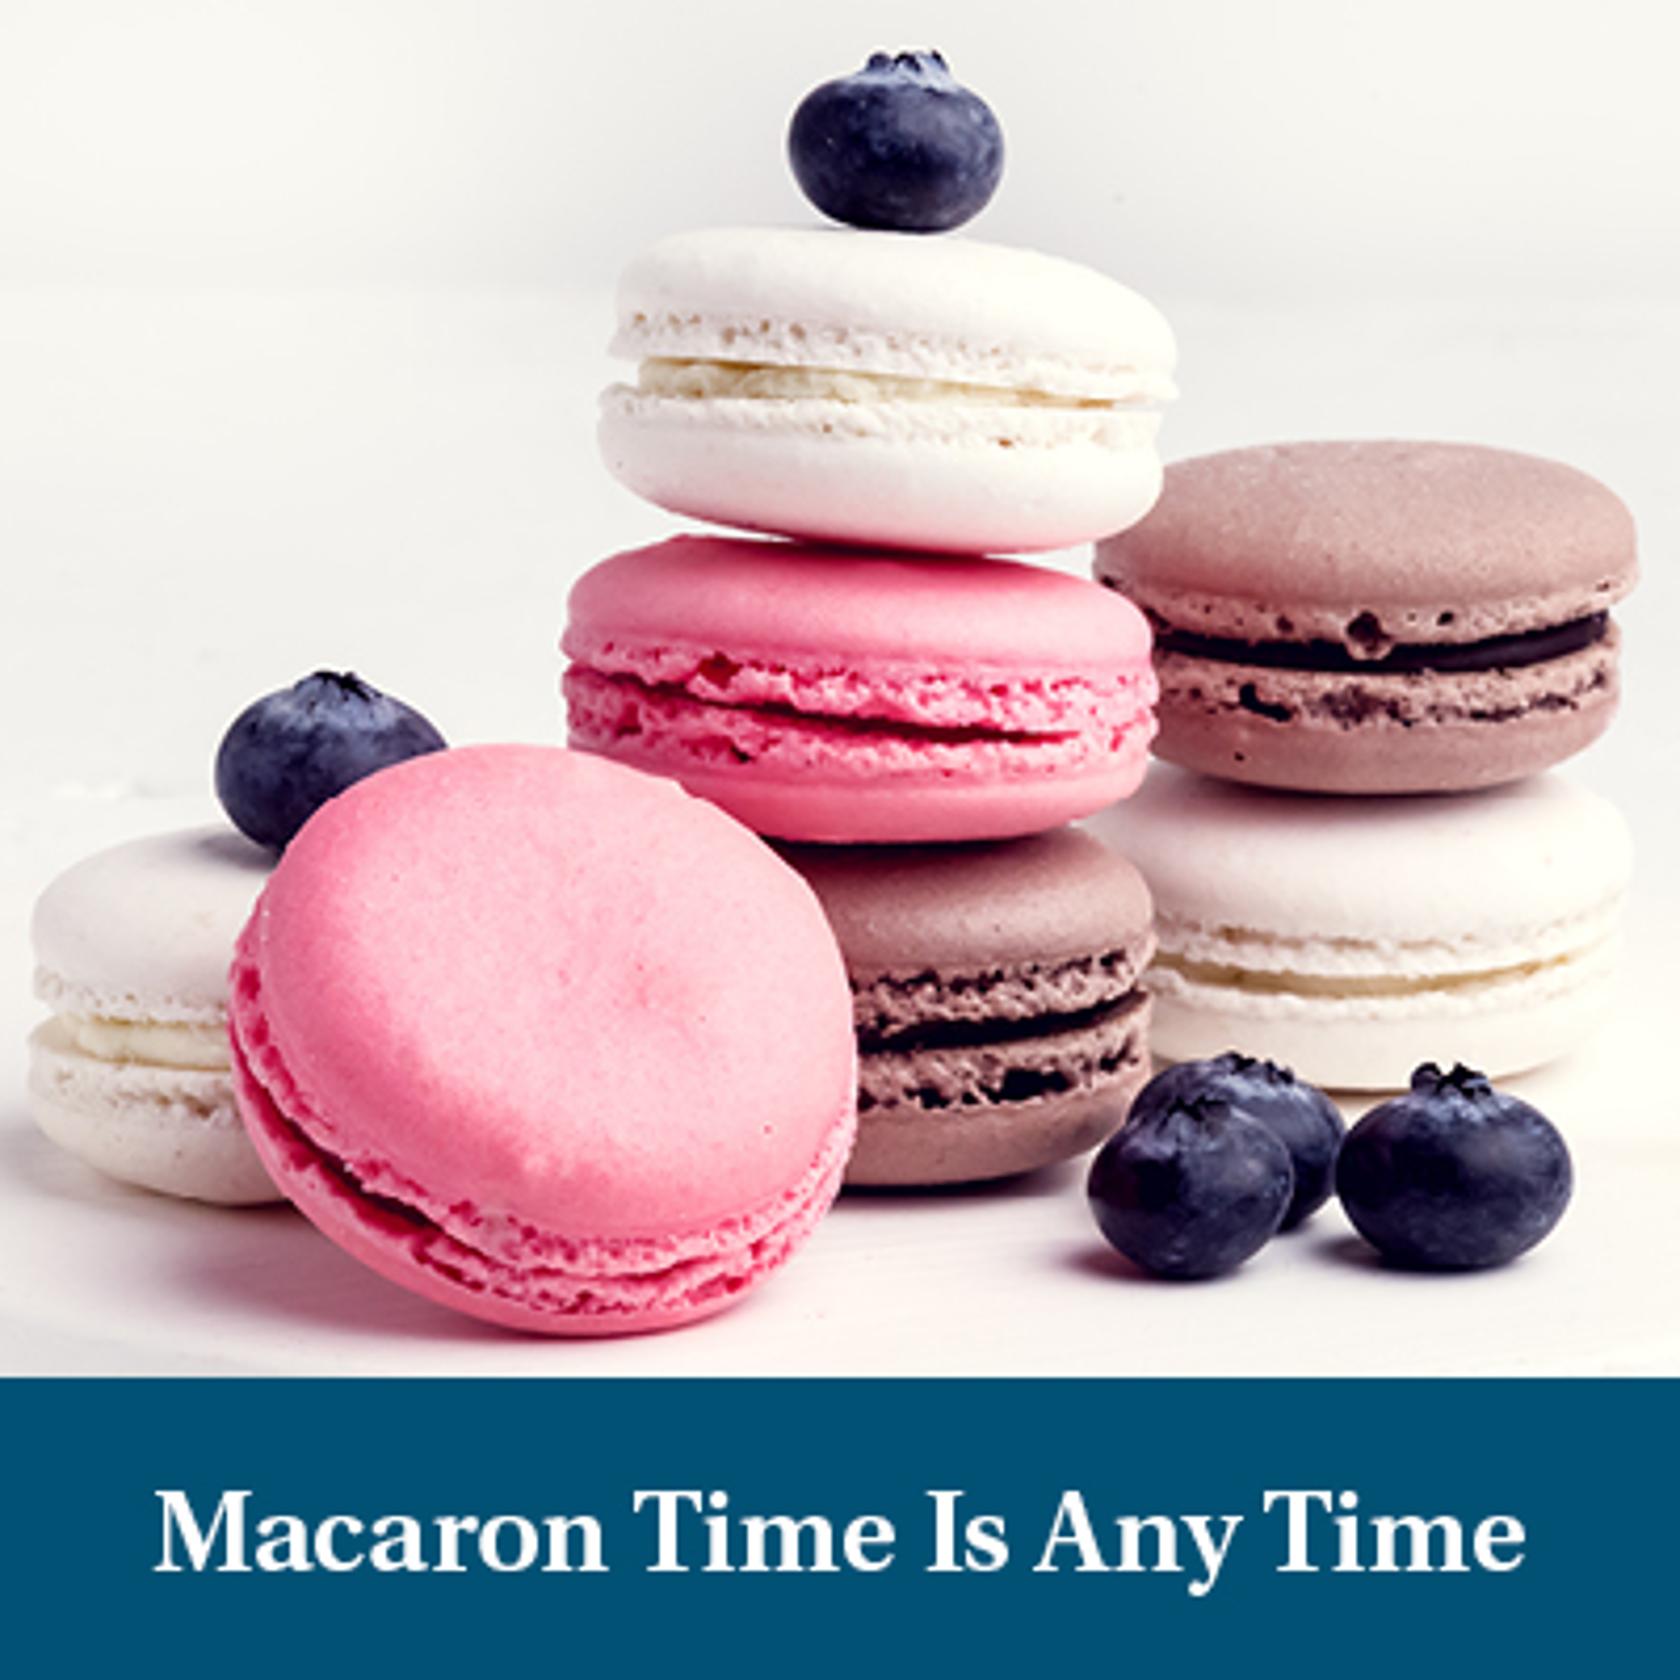 Macaron Time is Any Time